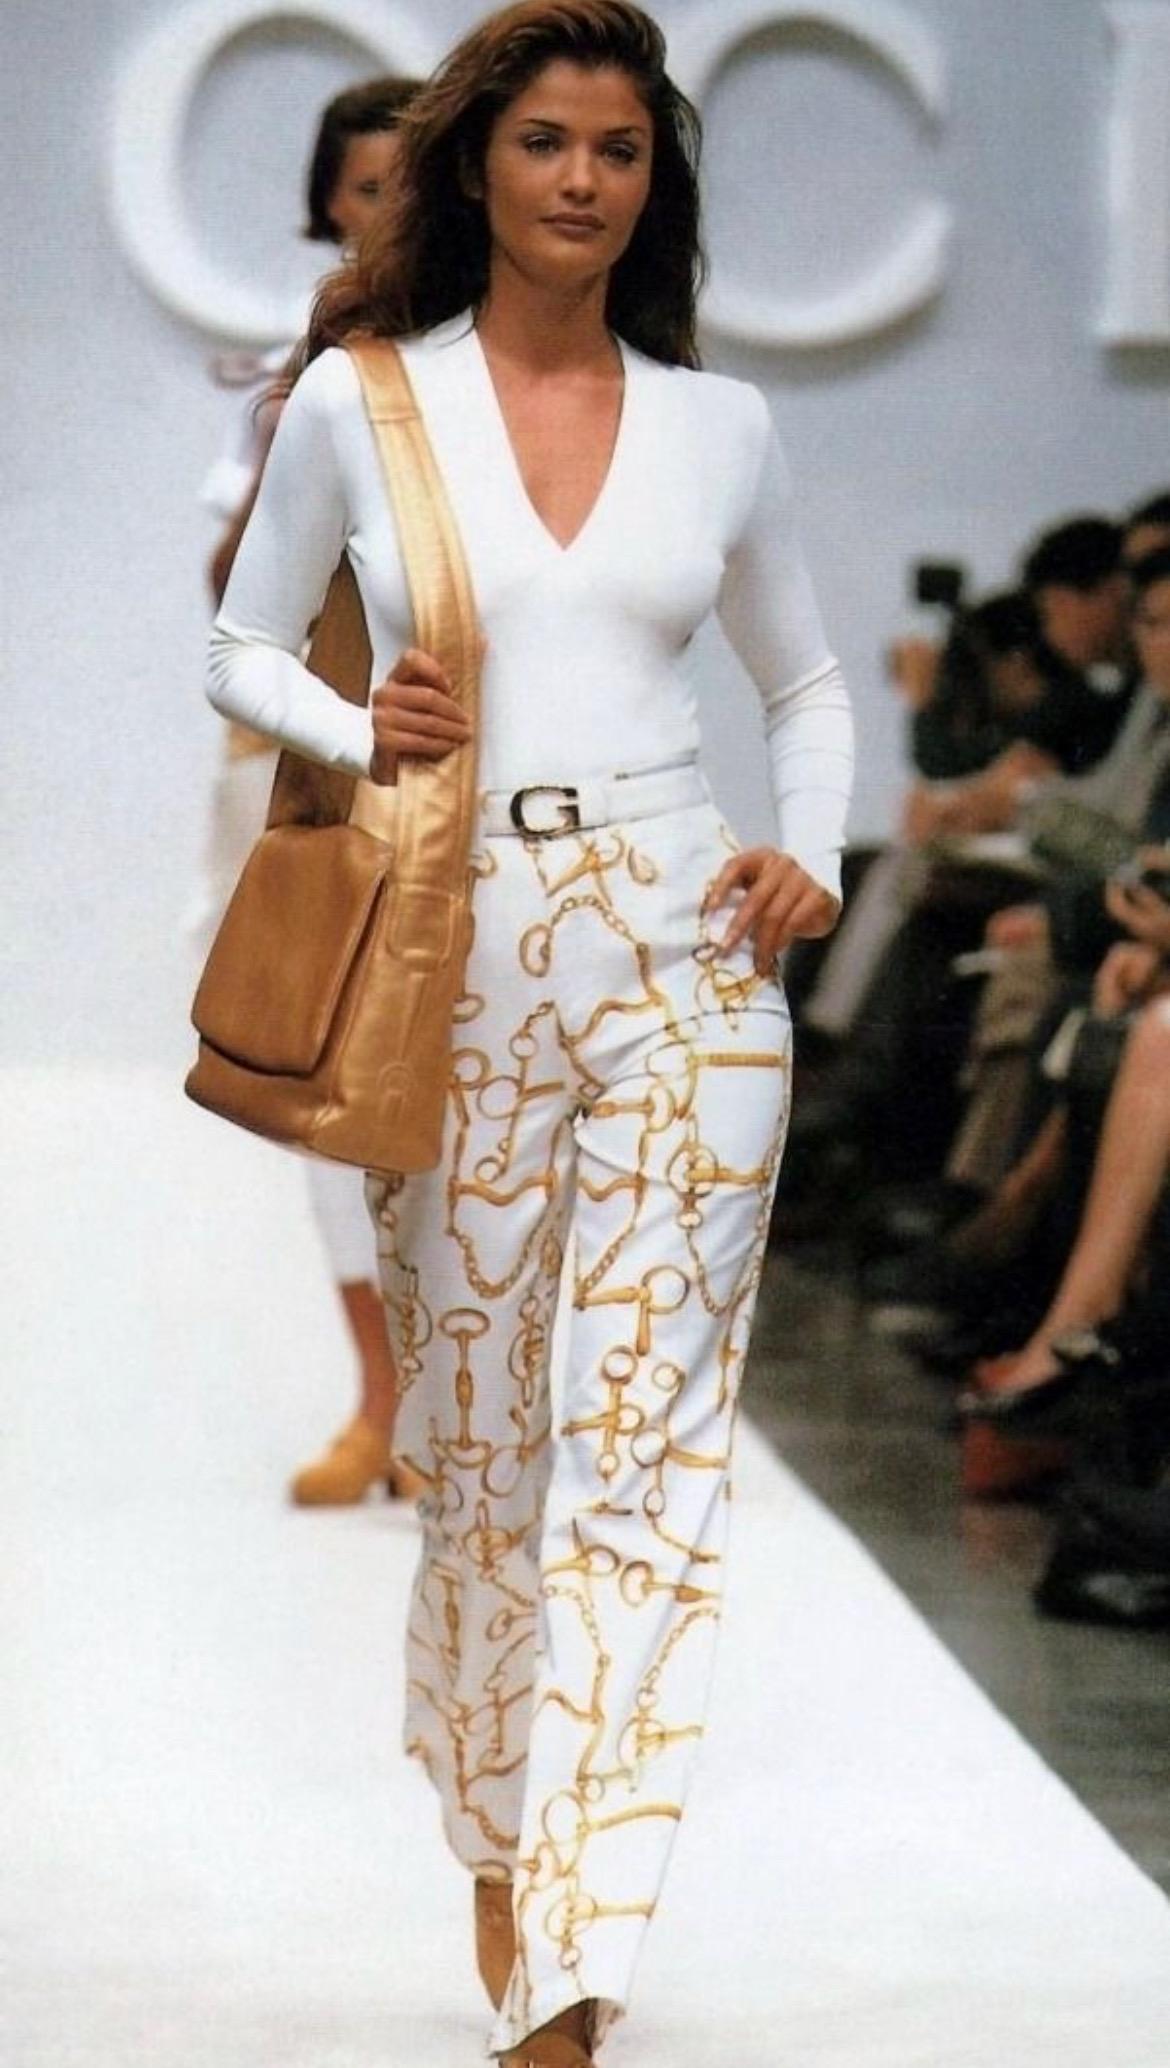 Presenting a pair of fabulous white denim Gucci pants. From the Spring/Summer 1993 collection, similar pants debuted on the season's runway modeled by Helena Christensen and were also used in the season's ad campaign. Perfectly Gucci, these